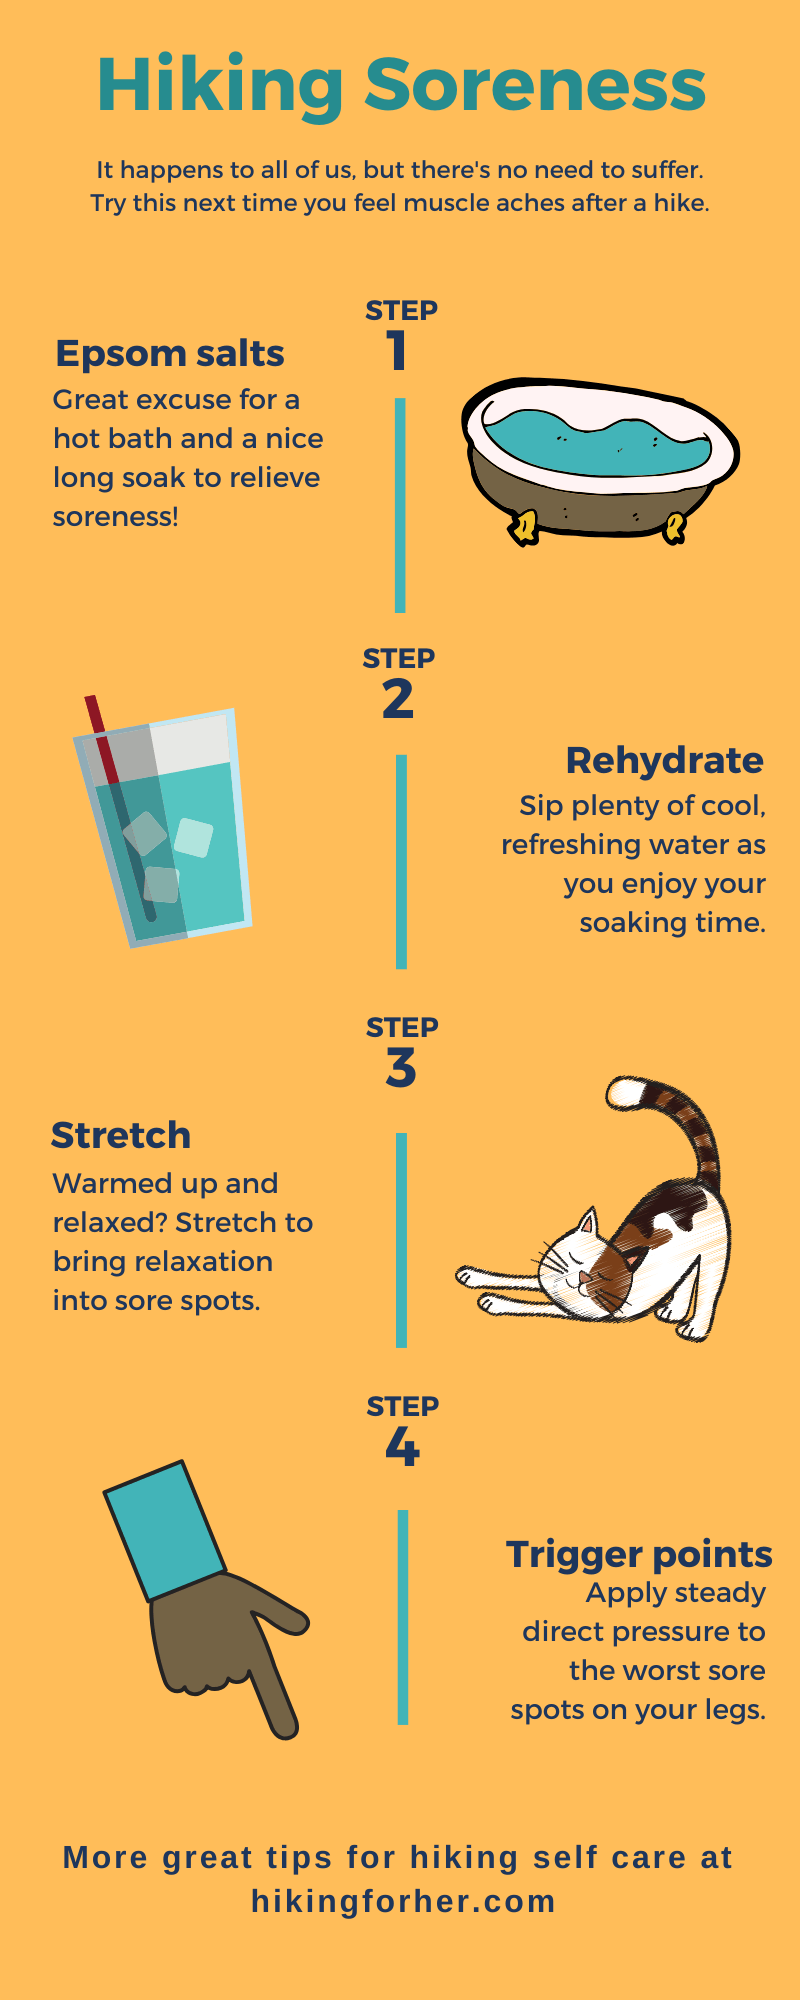 Techniques to reduce muscle soreness